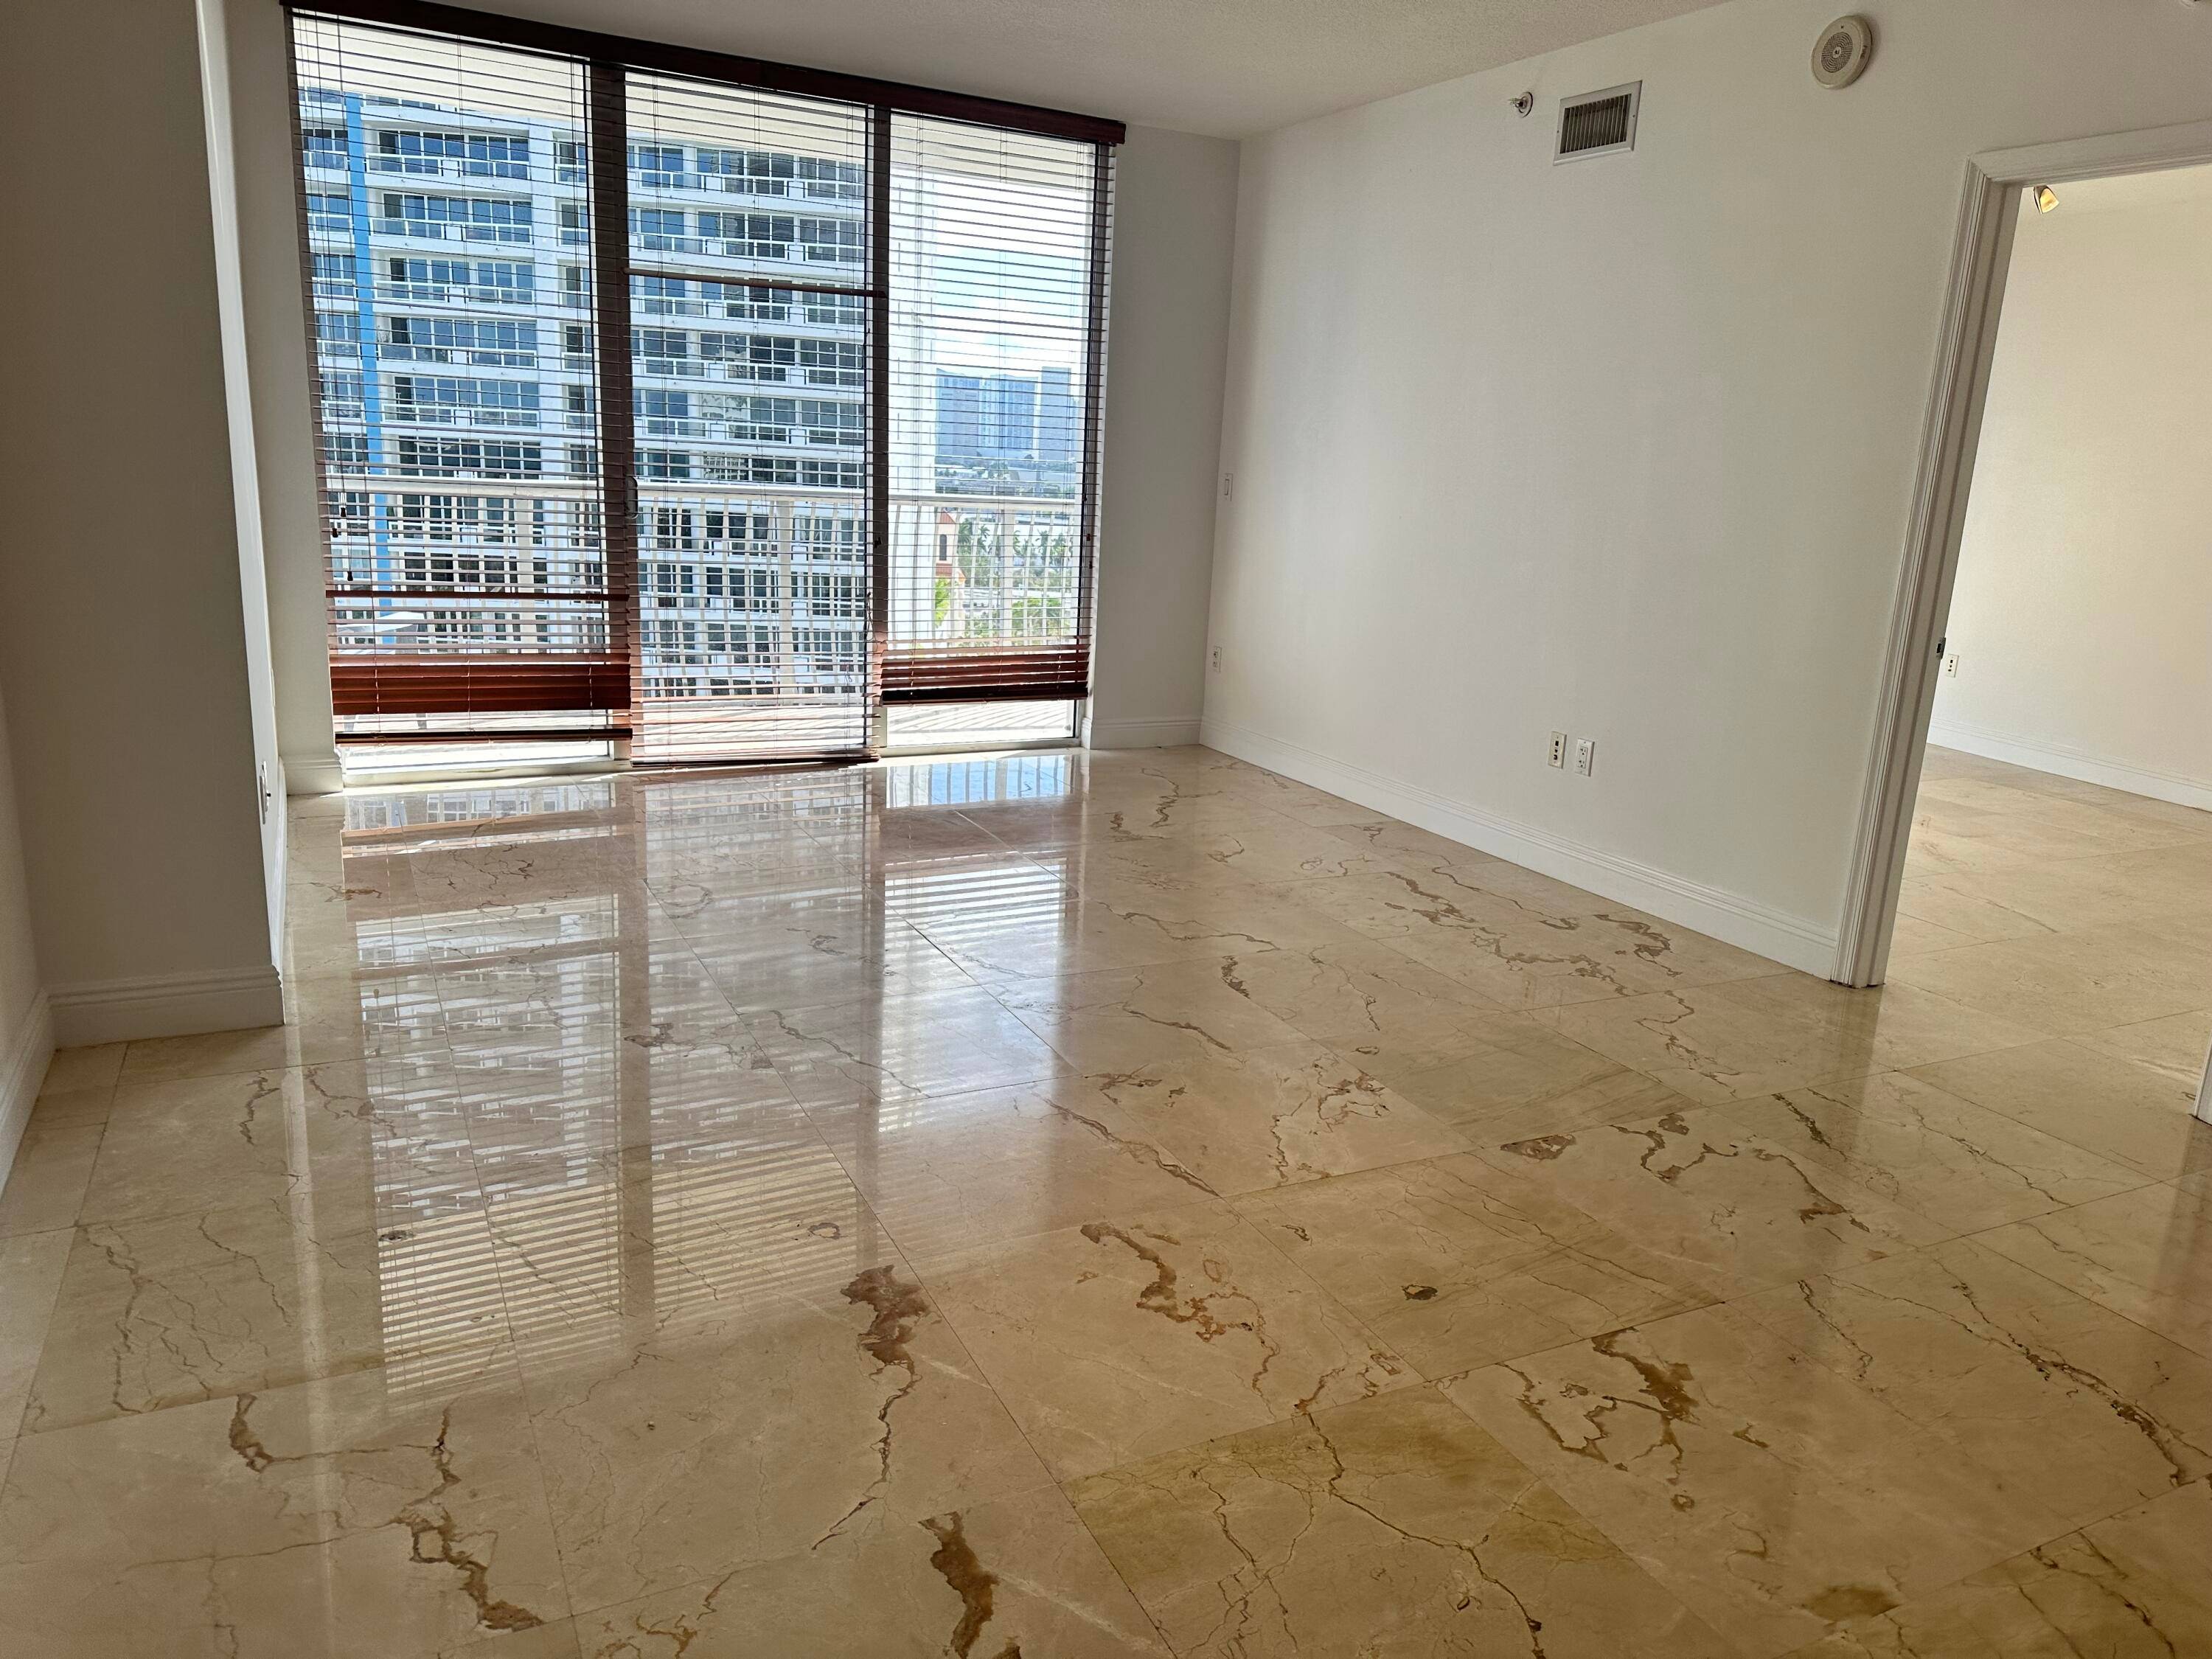 Condo with marble floors, magnificent water view of Miami Biscayne Bay.